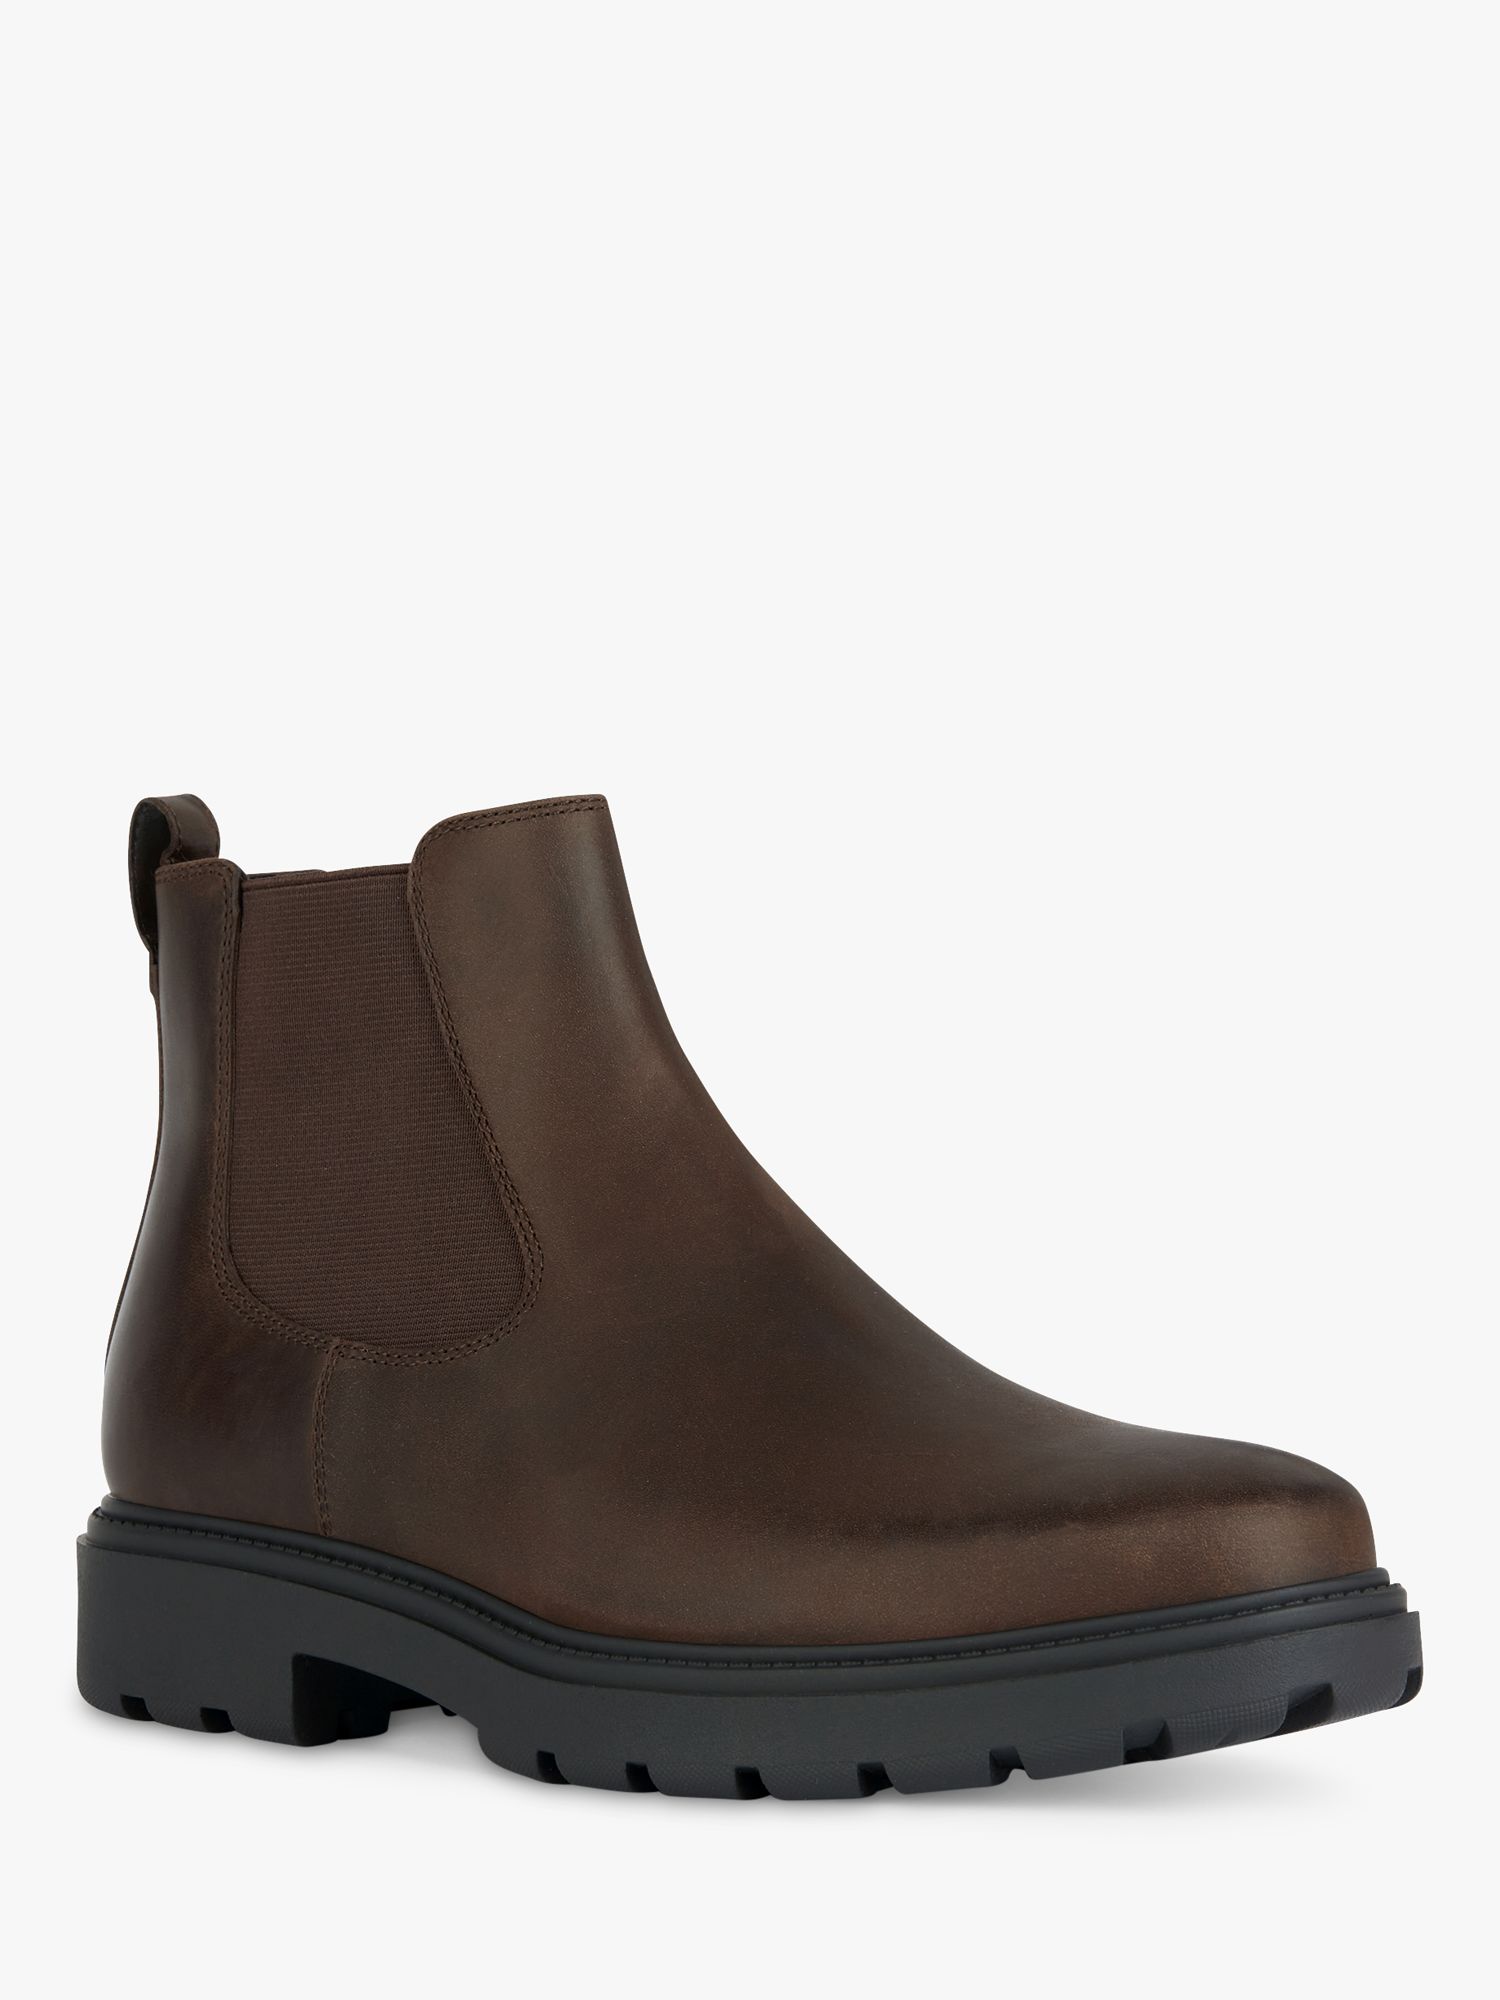 Geox Wide Fit Spherica EC7 Leather Ankle Boots, Coffee at John Lewis ...